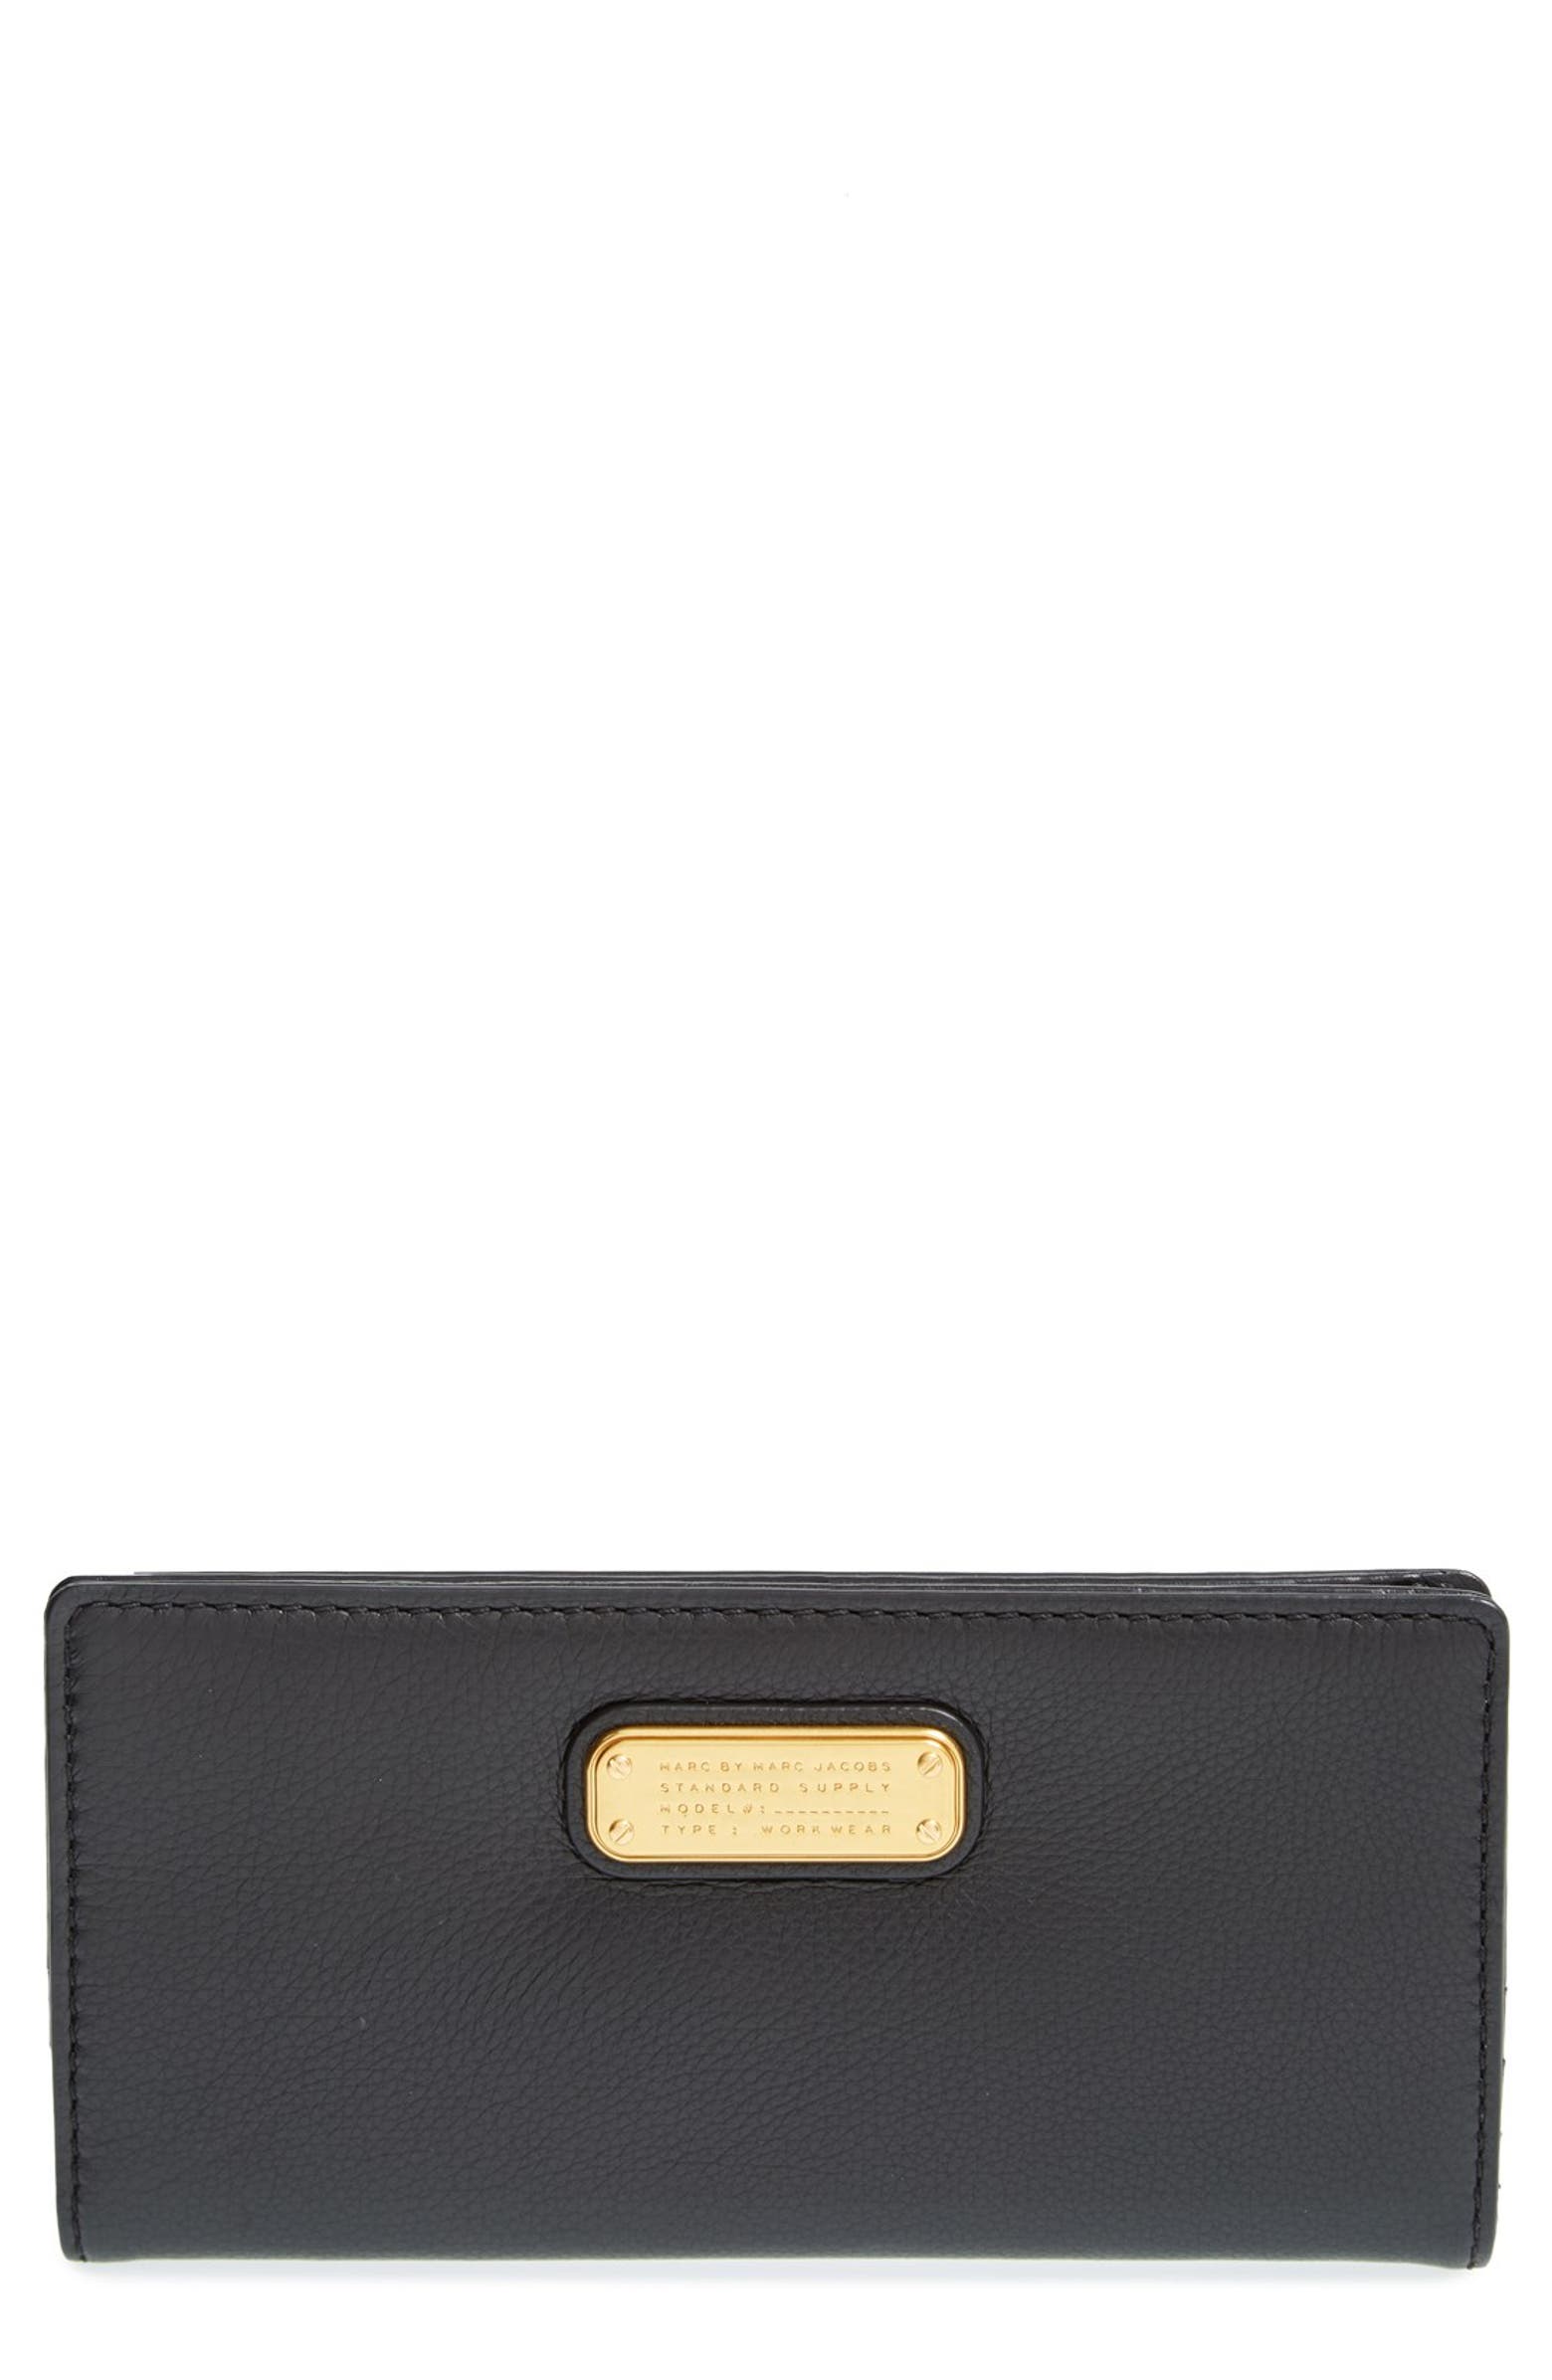 MARC BY MARC JACOBS 'New Q Tomoko' Leather Continental Wallet | Nordstrom